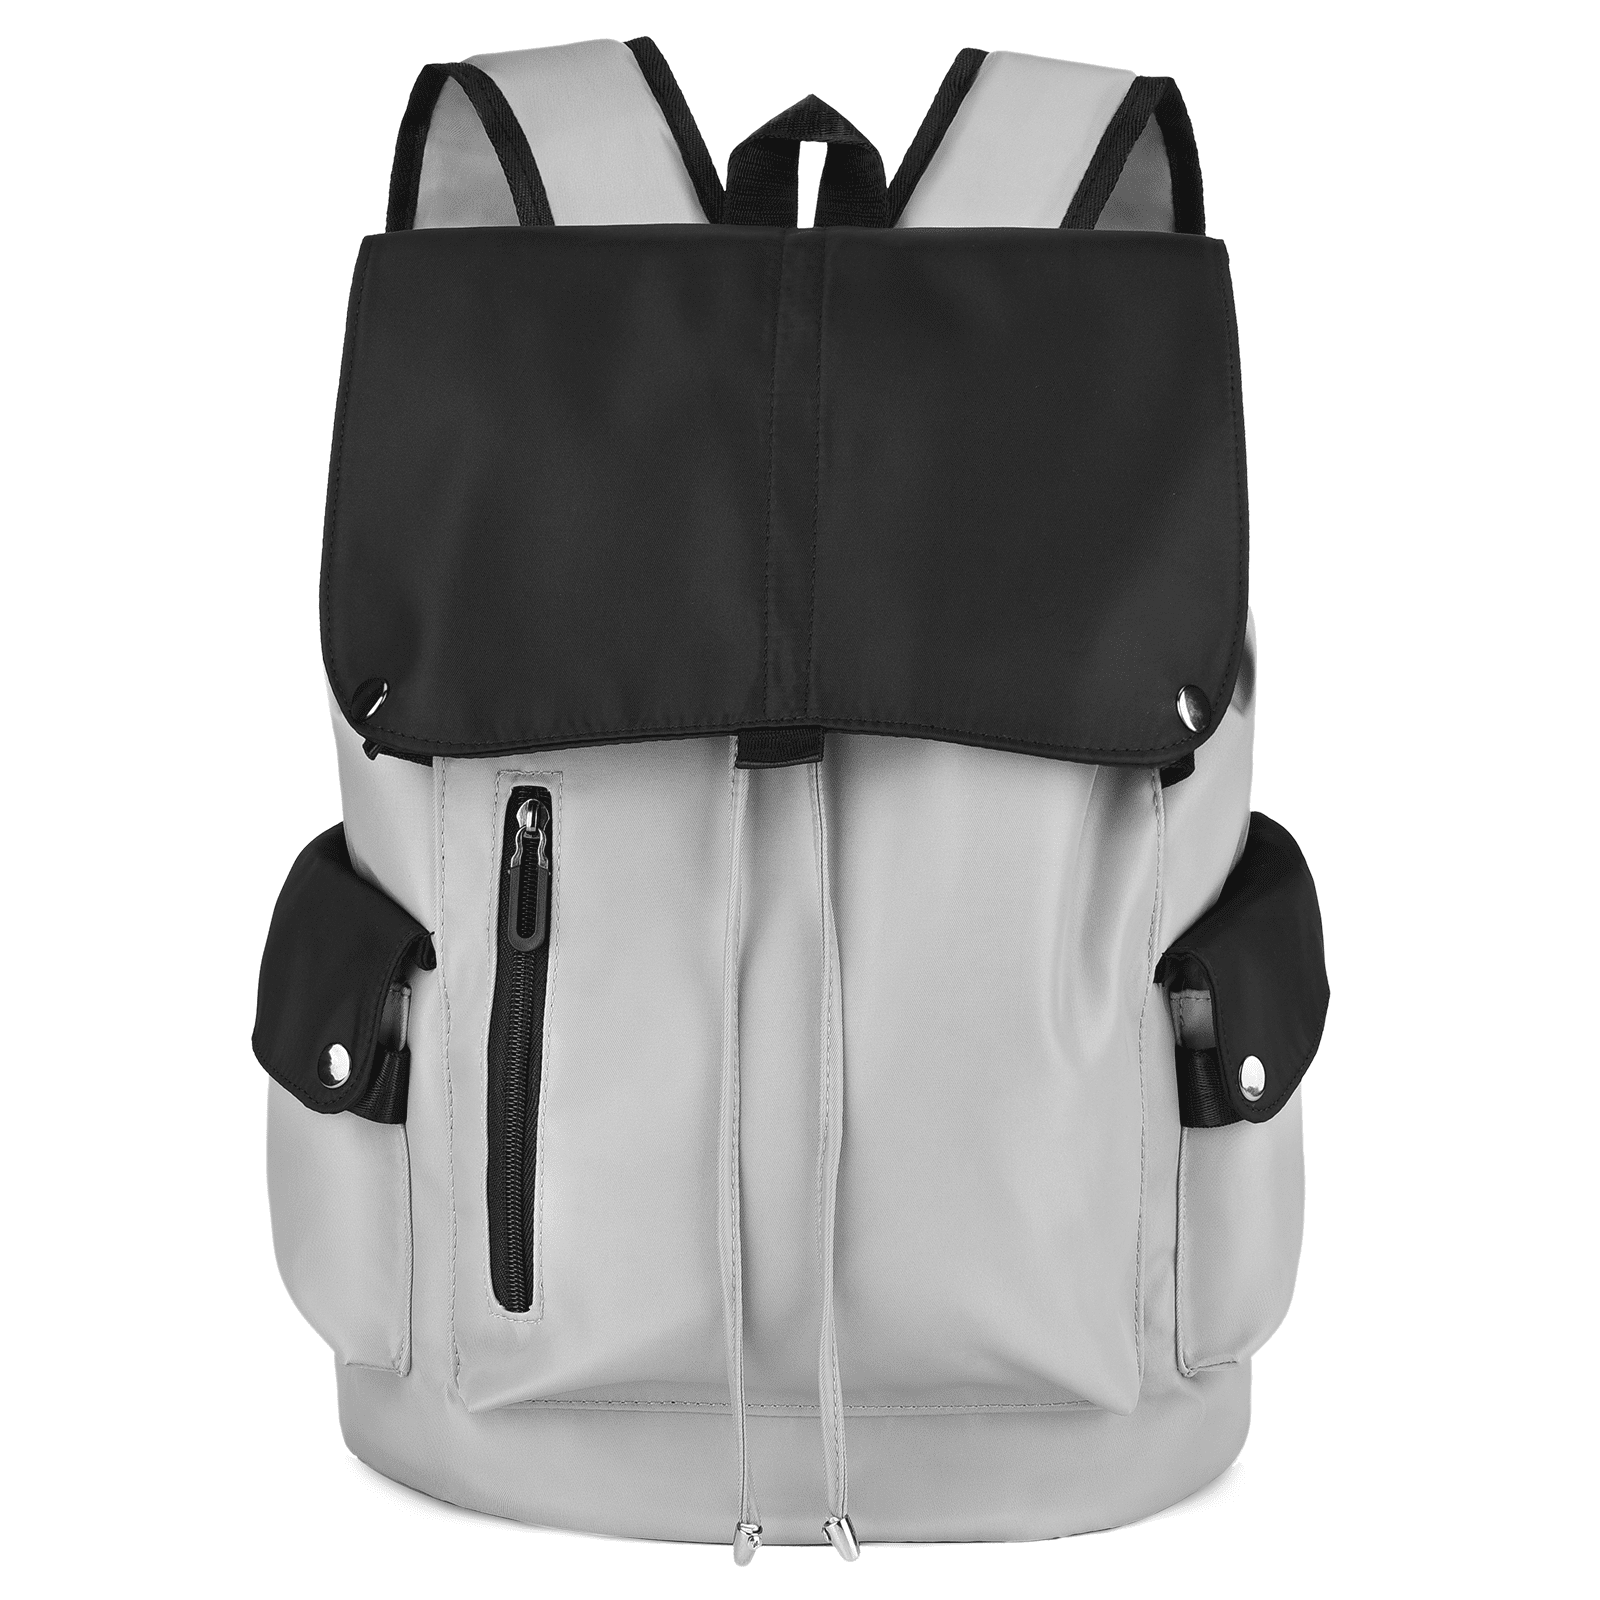 Lunch Bag Backpack, Insulated Cooler Lunch Box Backpack, Extra 